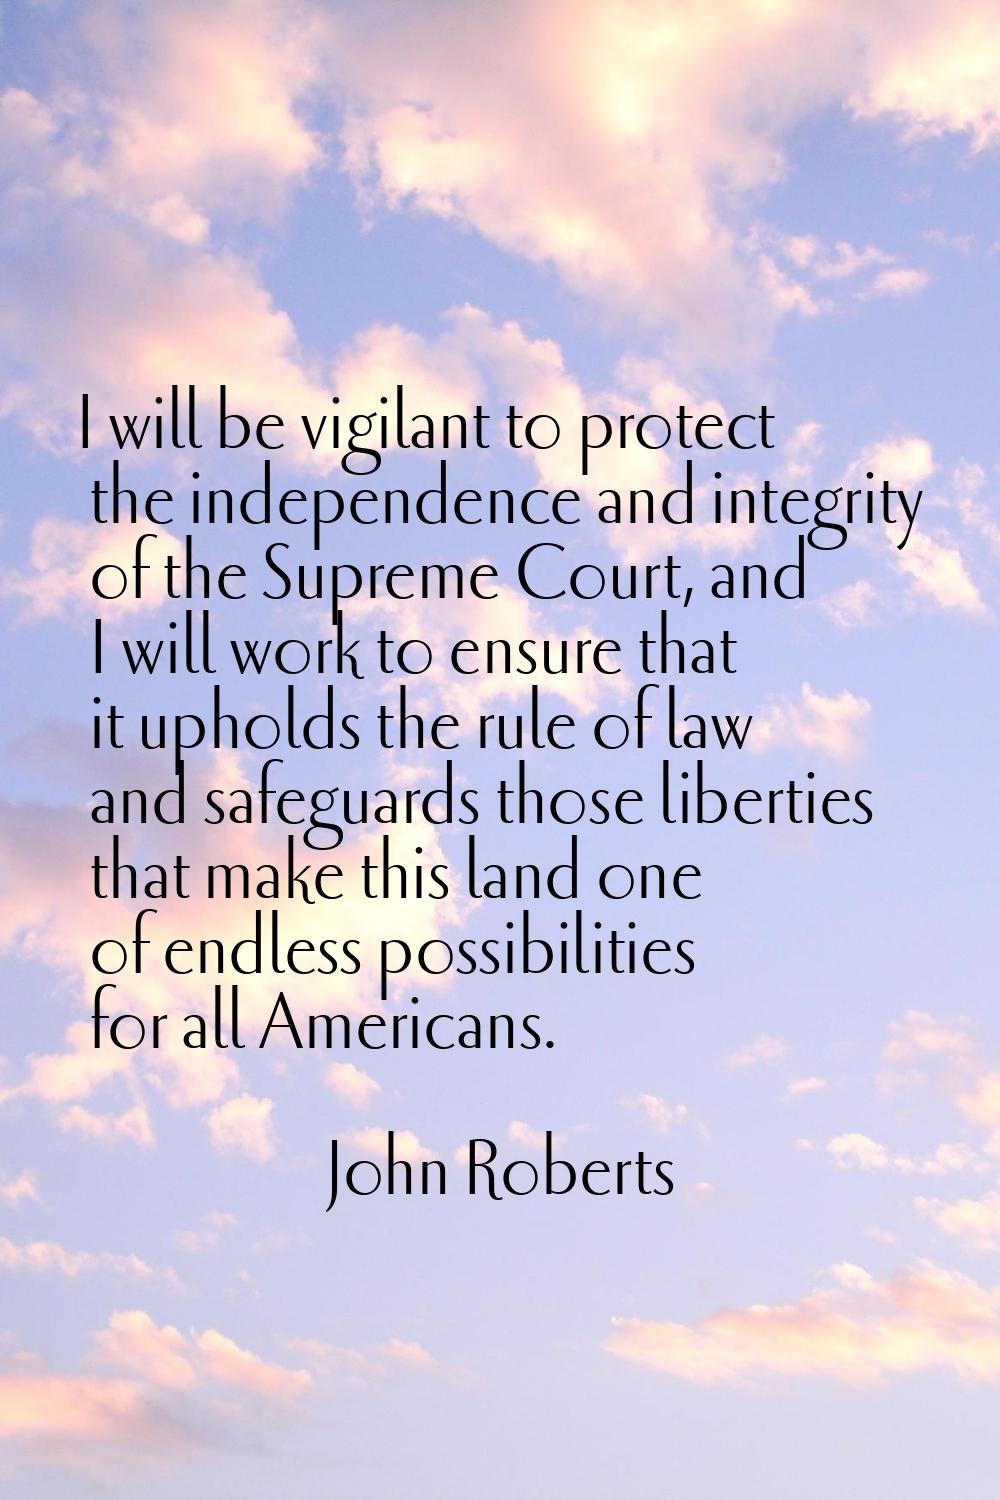 I will be vigilant to protect the independence and integrity of the Supreme Court, and I will work 